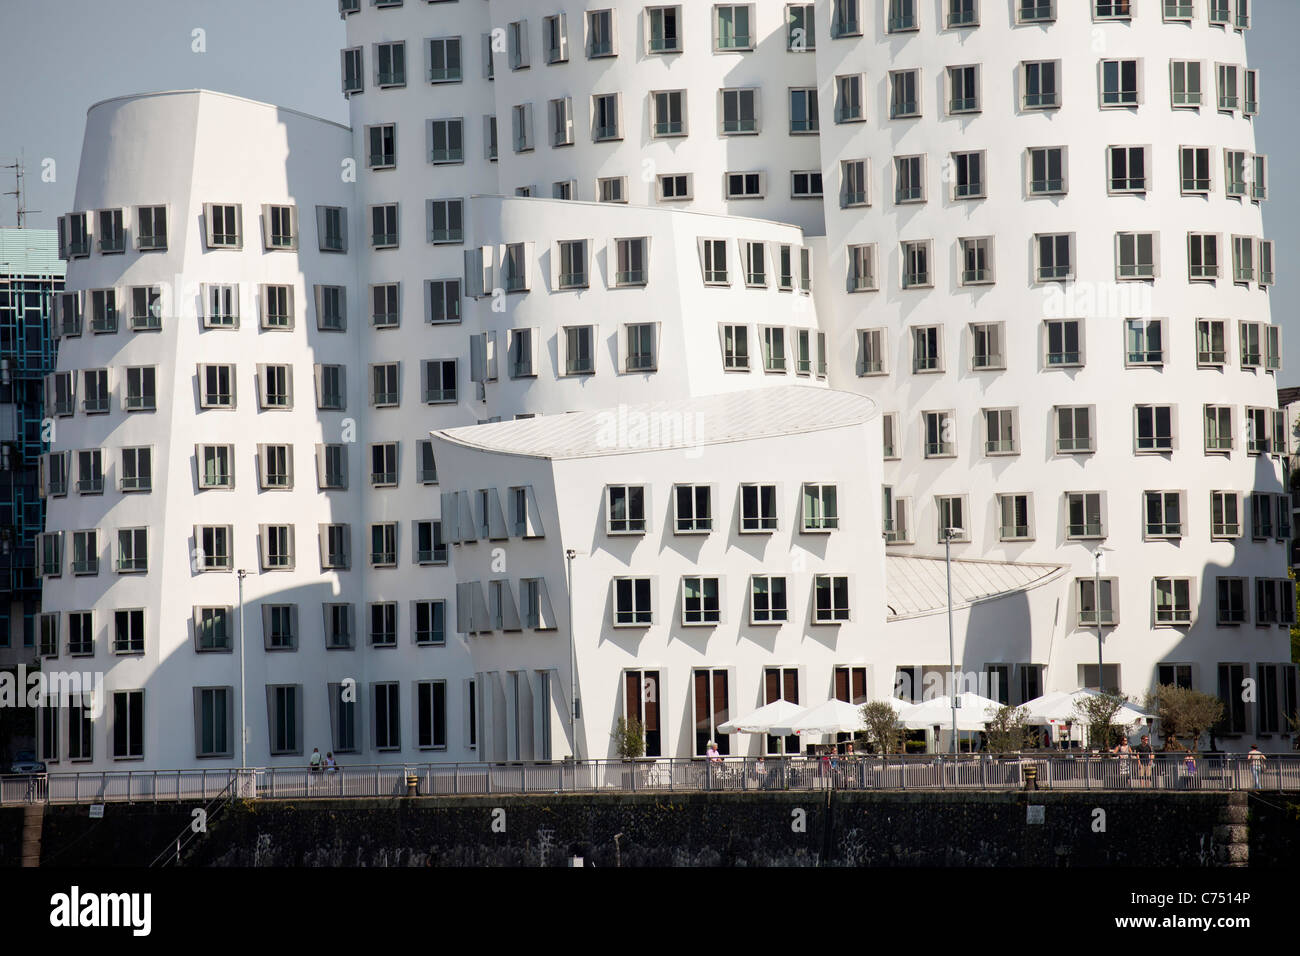 The Neue Zollhof  designed by  architect Frank O. Gehry of Media Harbor in  Duesseldorf,  Germany Stock Photo